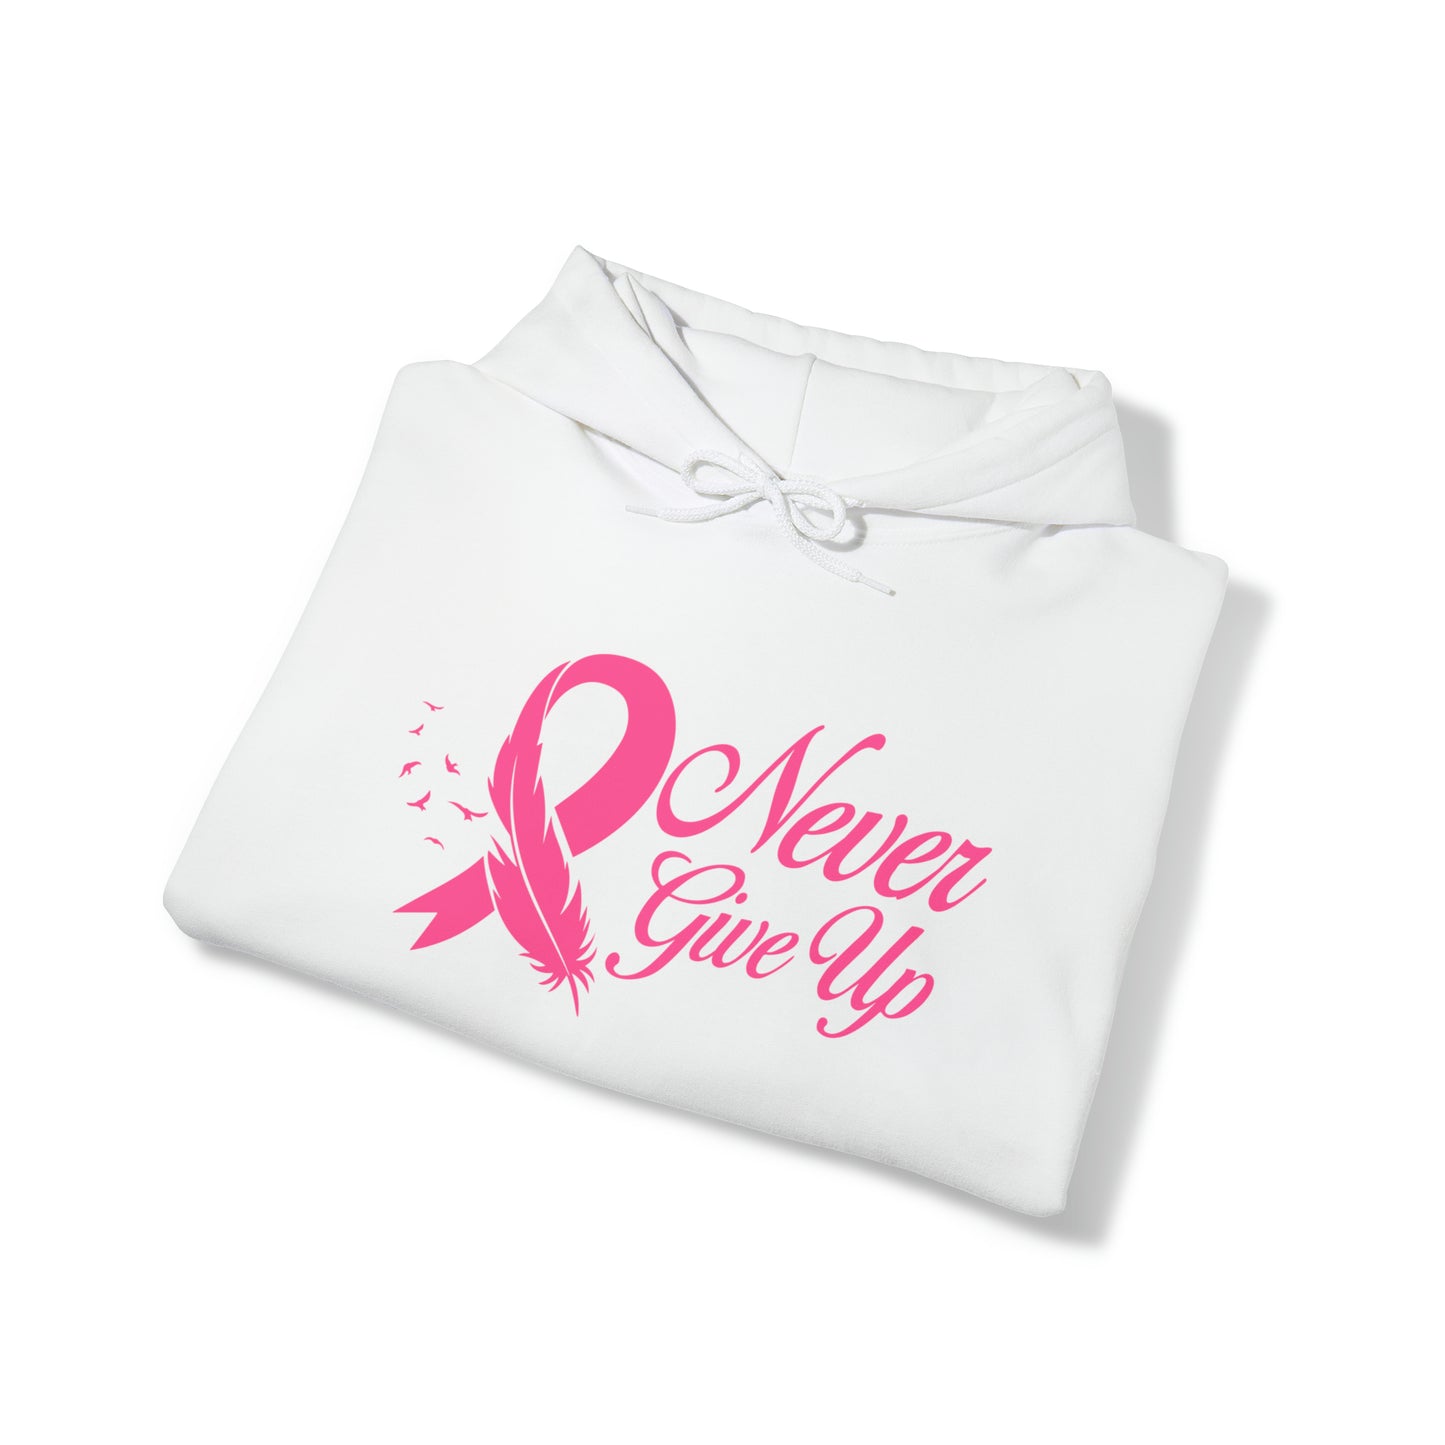 Never Give Up Breast Cancer Awareness Heavy Blend™ Hooded Sweatshirt